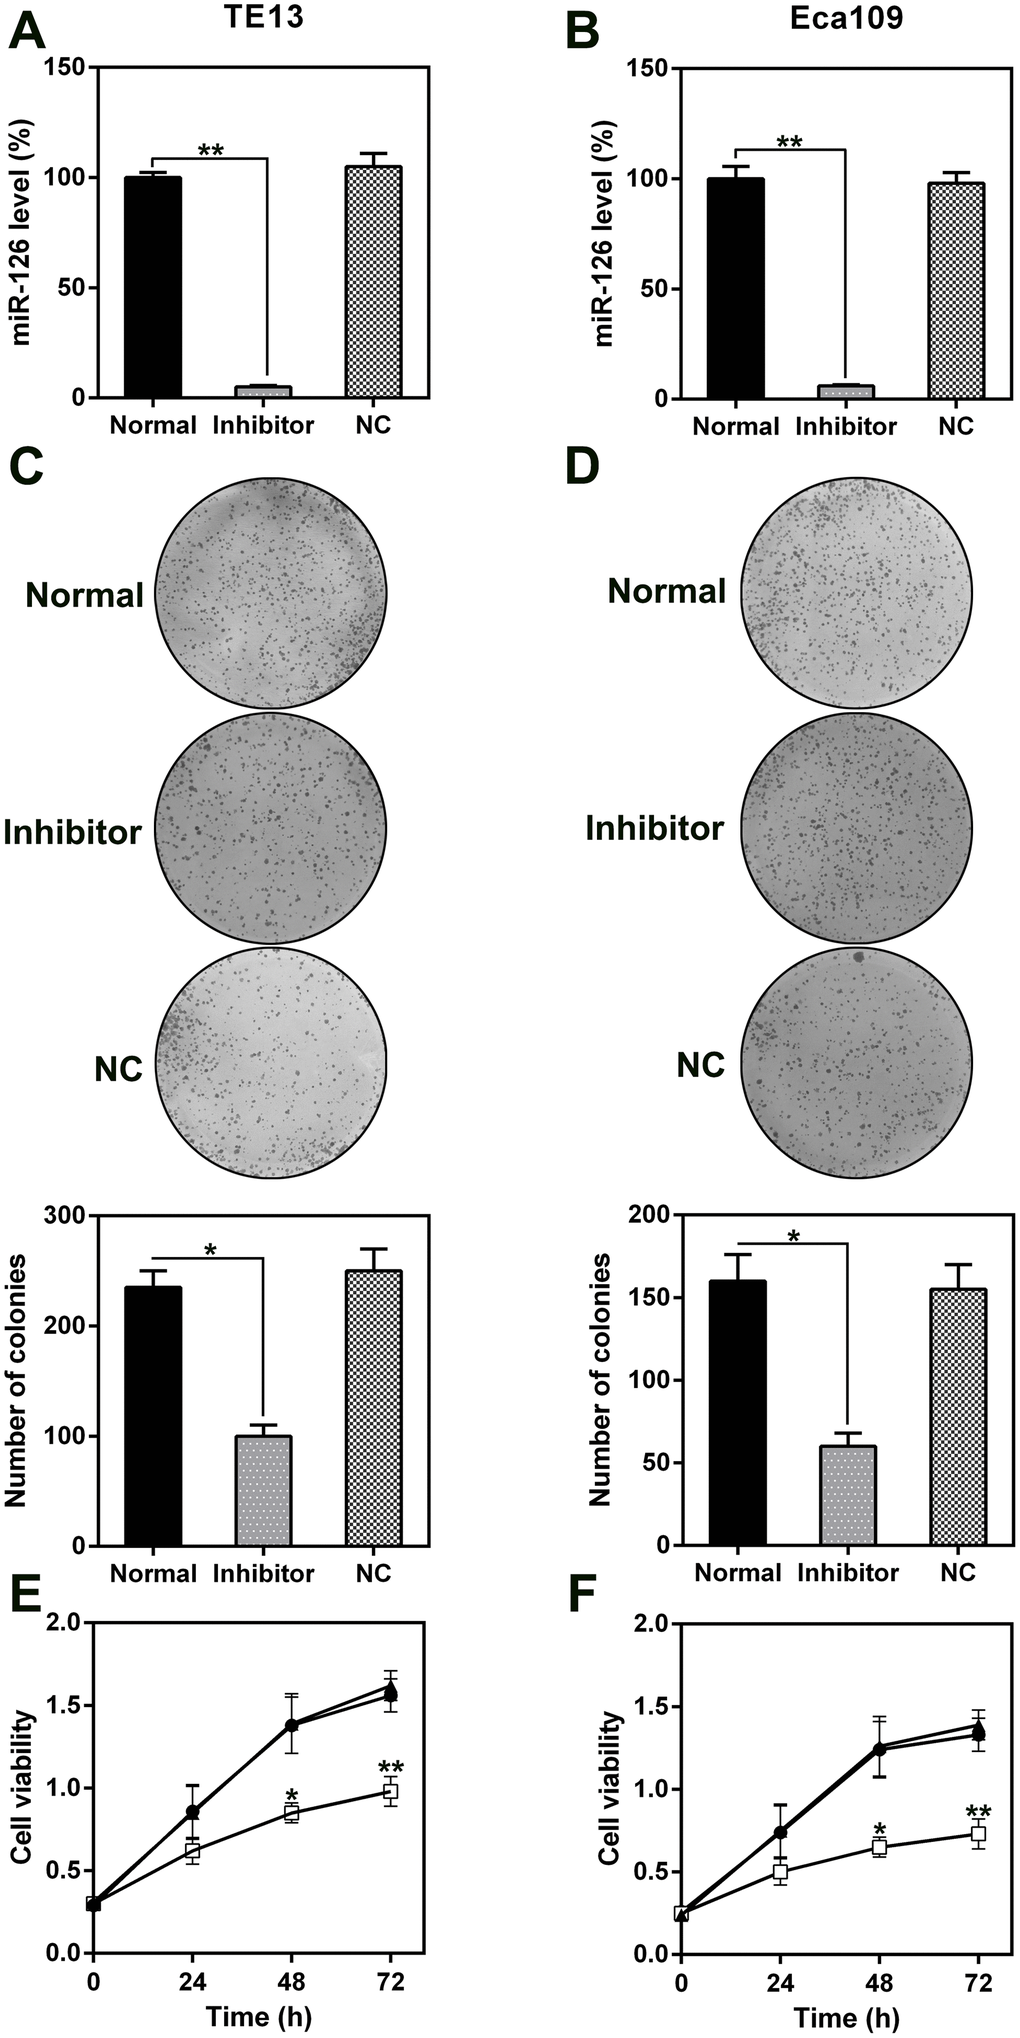 Effect of miR-126 on ESCC cell proliferation. (A, B) miR-126 mRNA levels in TE13 and Eca109 cells treated with miR-126 or NC inhibitors detected using qPCR. (C, D) Soft agar CFA of TE13 and Eca109 cells treated with miR-126 or inhibitors. Lower panel indicates the colony number. (E, F) TE13 and Eca109 cell proliferation rate at 1, 2, and 3 d after transfection. Results are displayed as the average ± SD. *P 